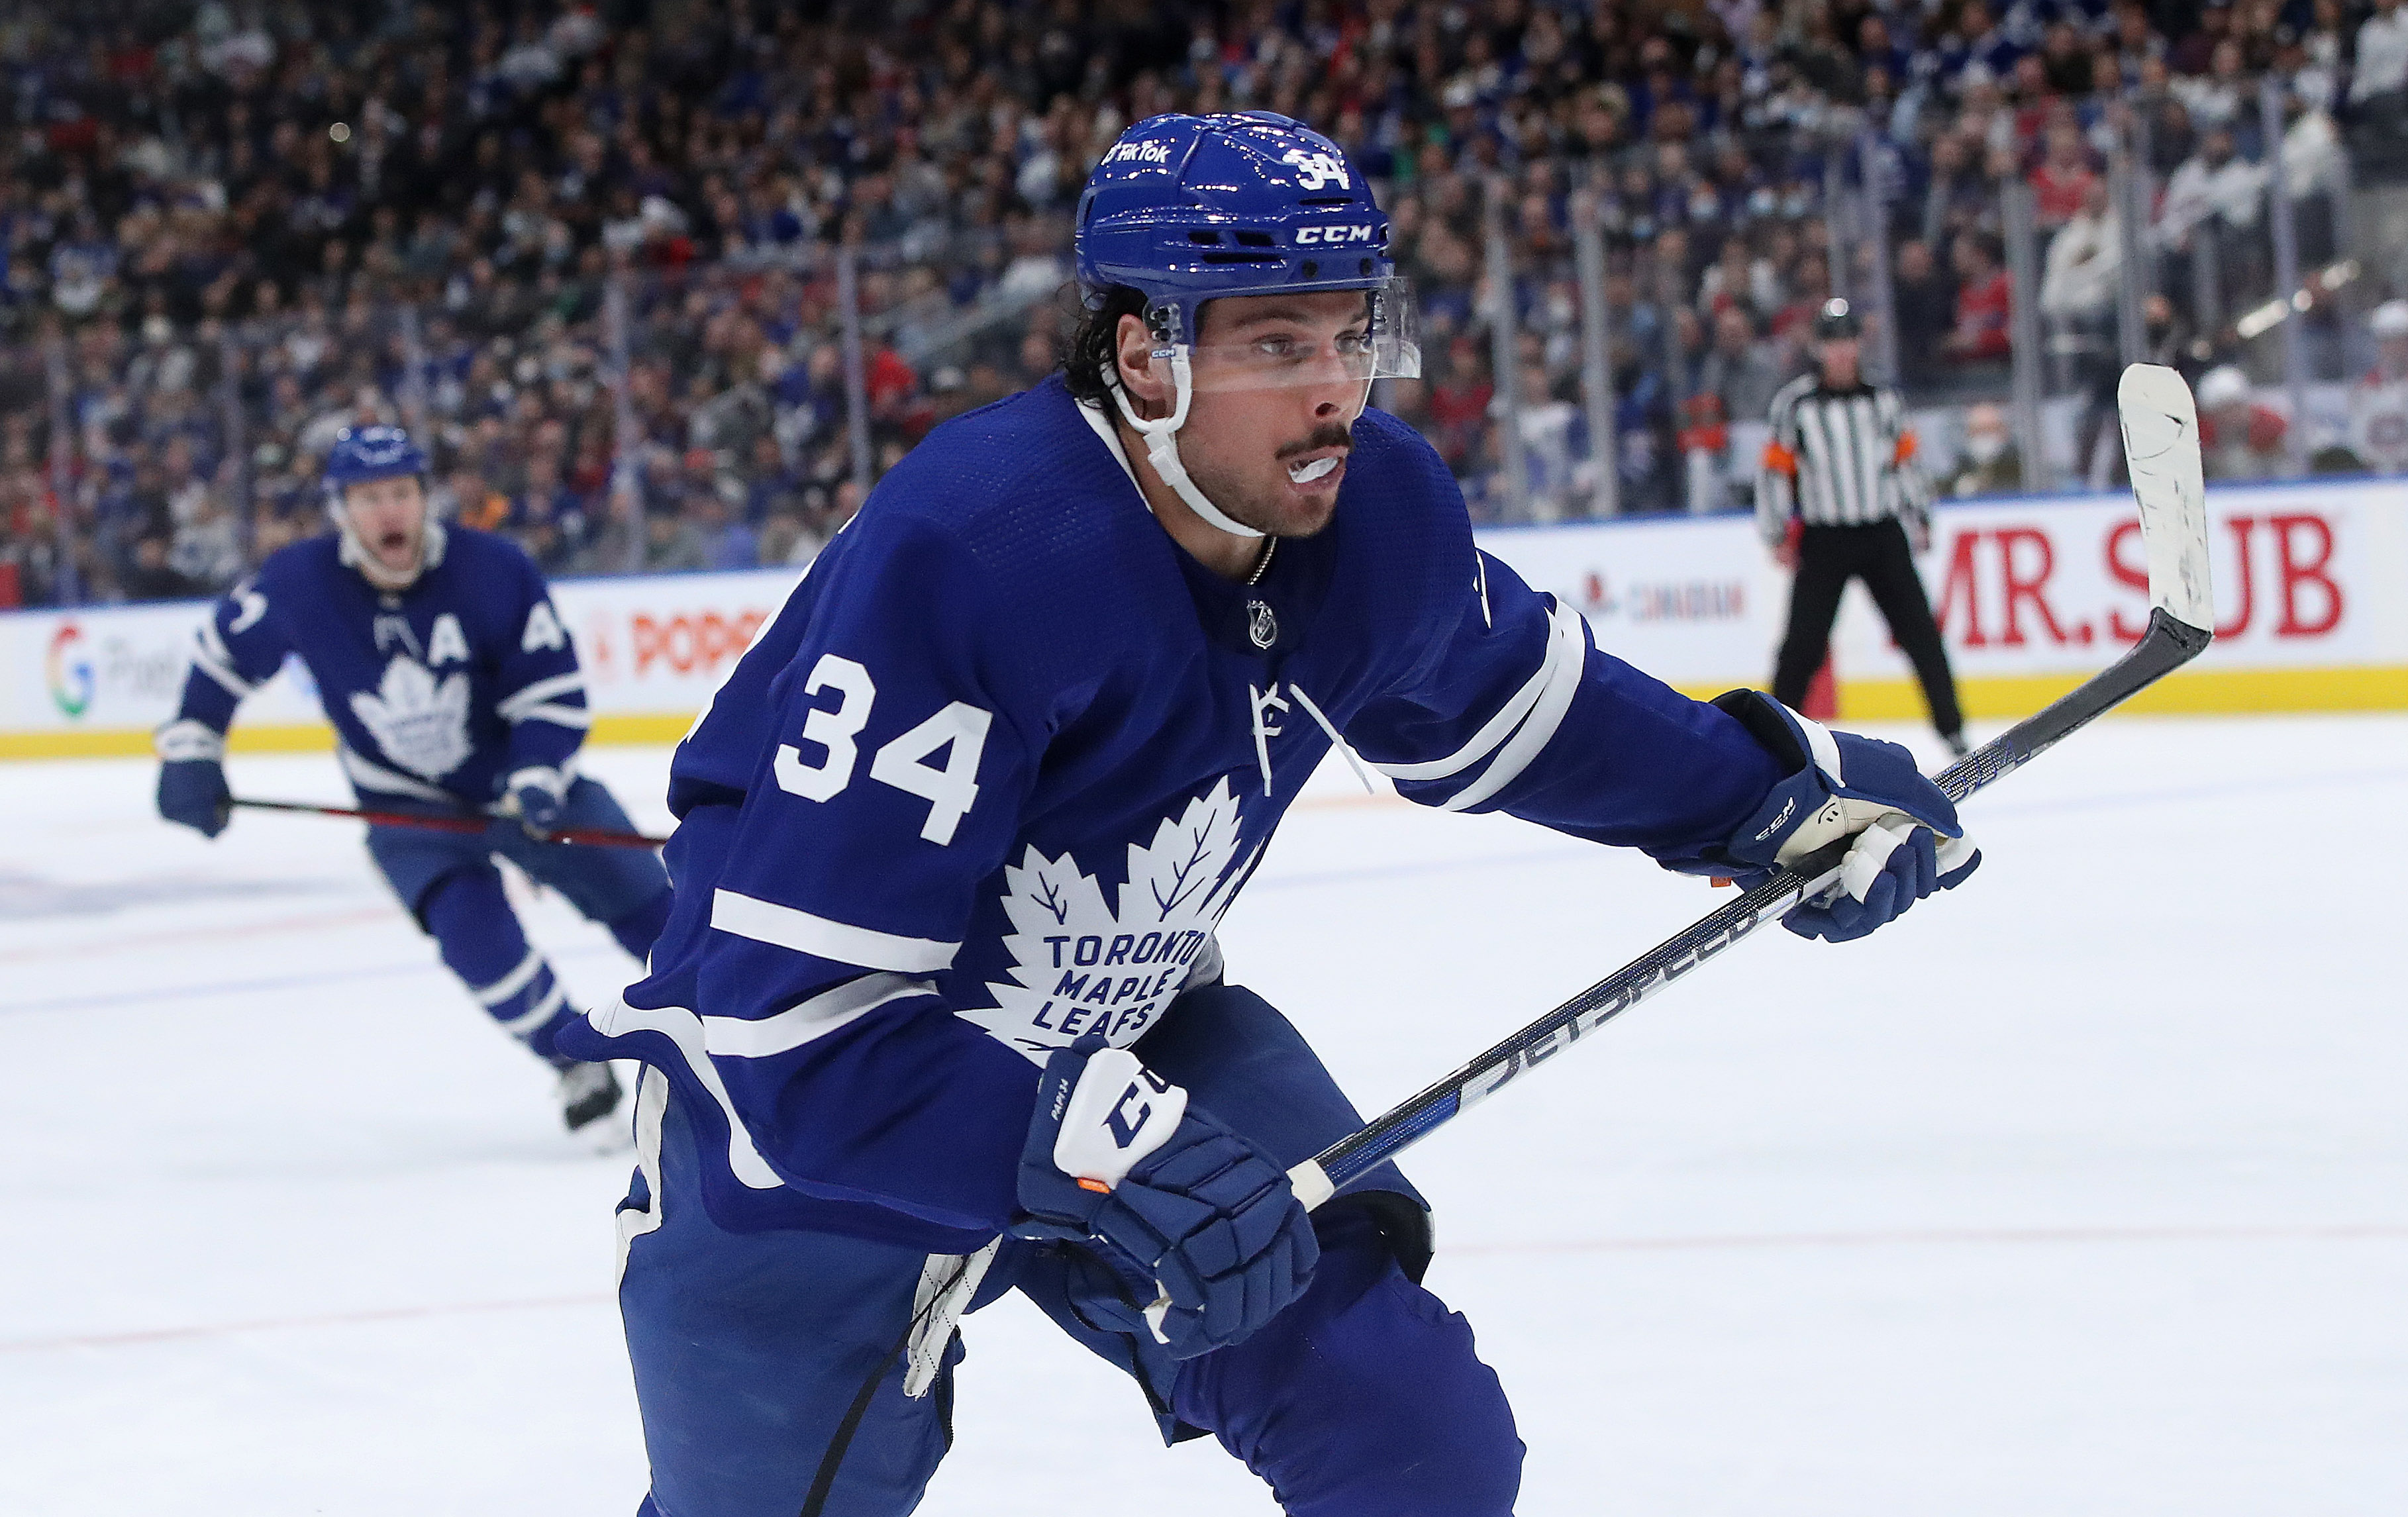 Toronto Maple Leafs beat the Montreal Canadiens 3-2